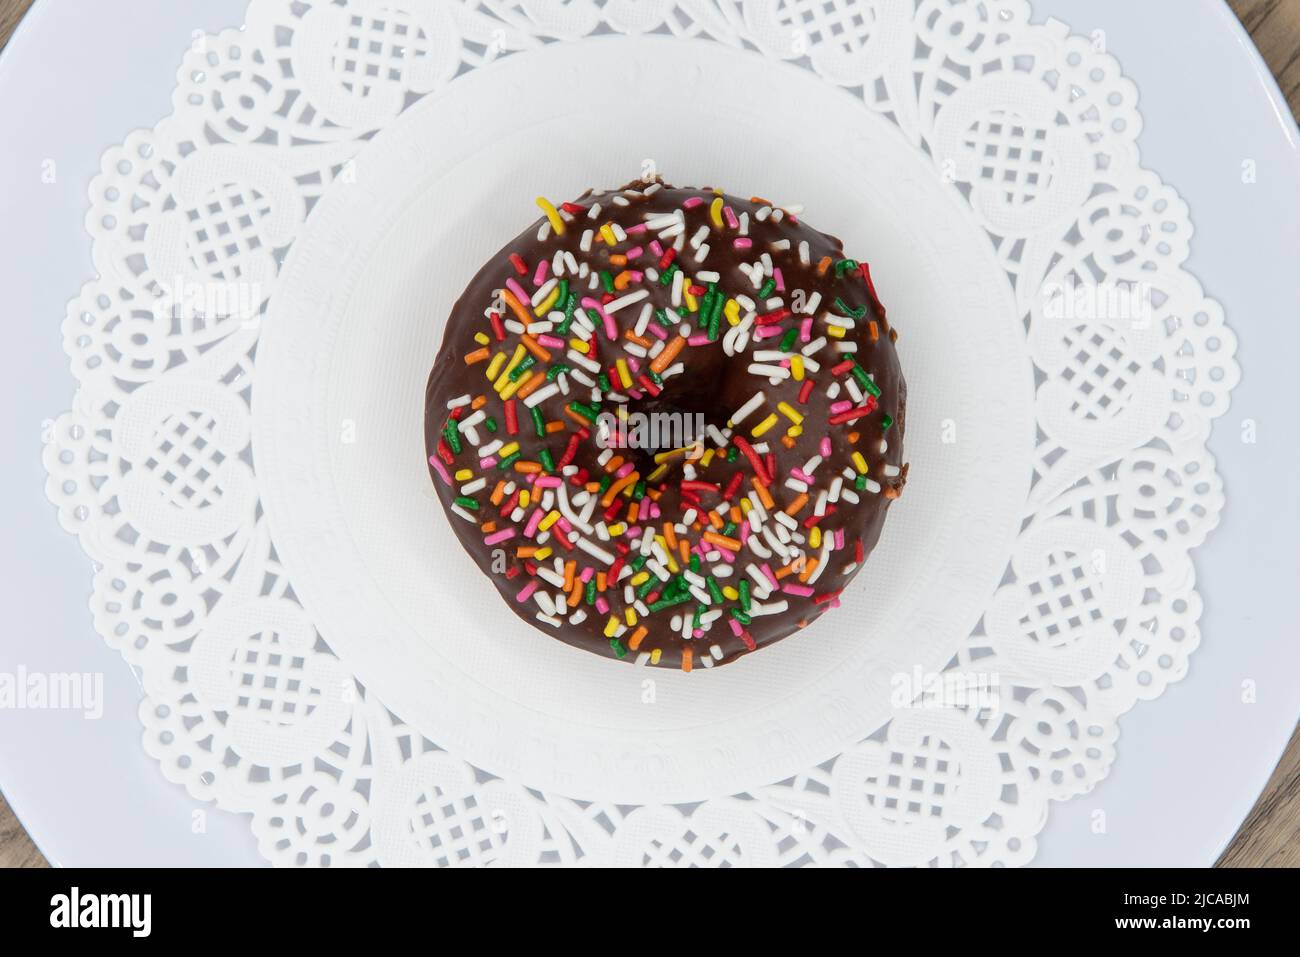 Overhead view of tempting fresh from the oven sprinked cake donut from the bakery served on a plate. Stock Photo